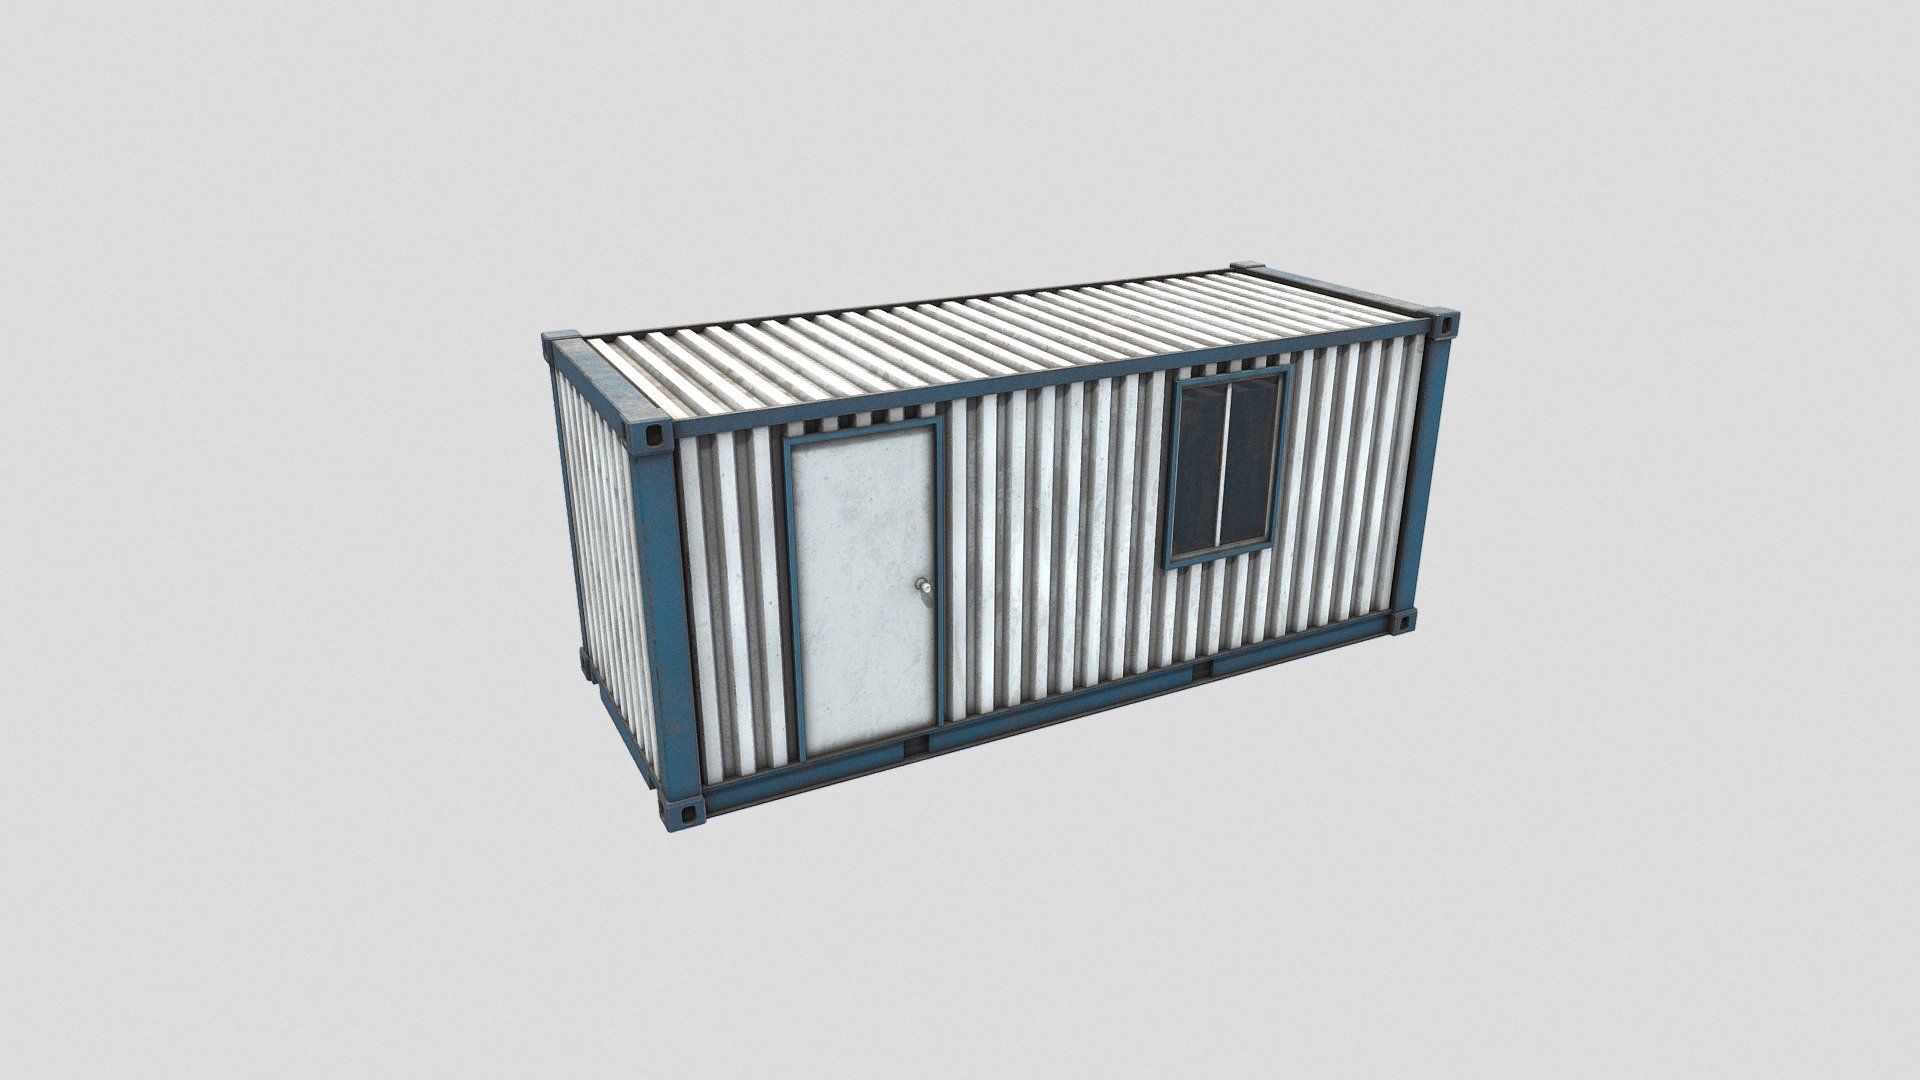 Office Container game ready real time low poly 3d model

This model is suitable for use in (game engines, broadcast, high-res film closeups, advertising, animations, visualizations)

FEATURES:

-High-quality polygonal model
-Models resolutions are optimized for polygon efficiency medium poly
-Model is fully textured with all materials applied 
-Logicaly named materials and textures

TEXTURES

4k color normal metal rough opacity(pbr) - Office Container Low Poly - Buy Royalty Free 3D model by Pbr_Studio (@pbr.game.ready) 3d model